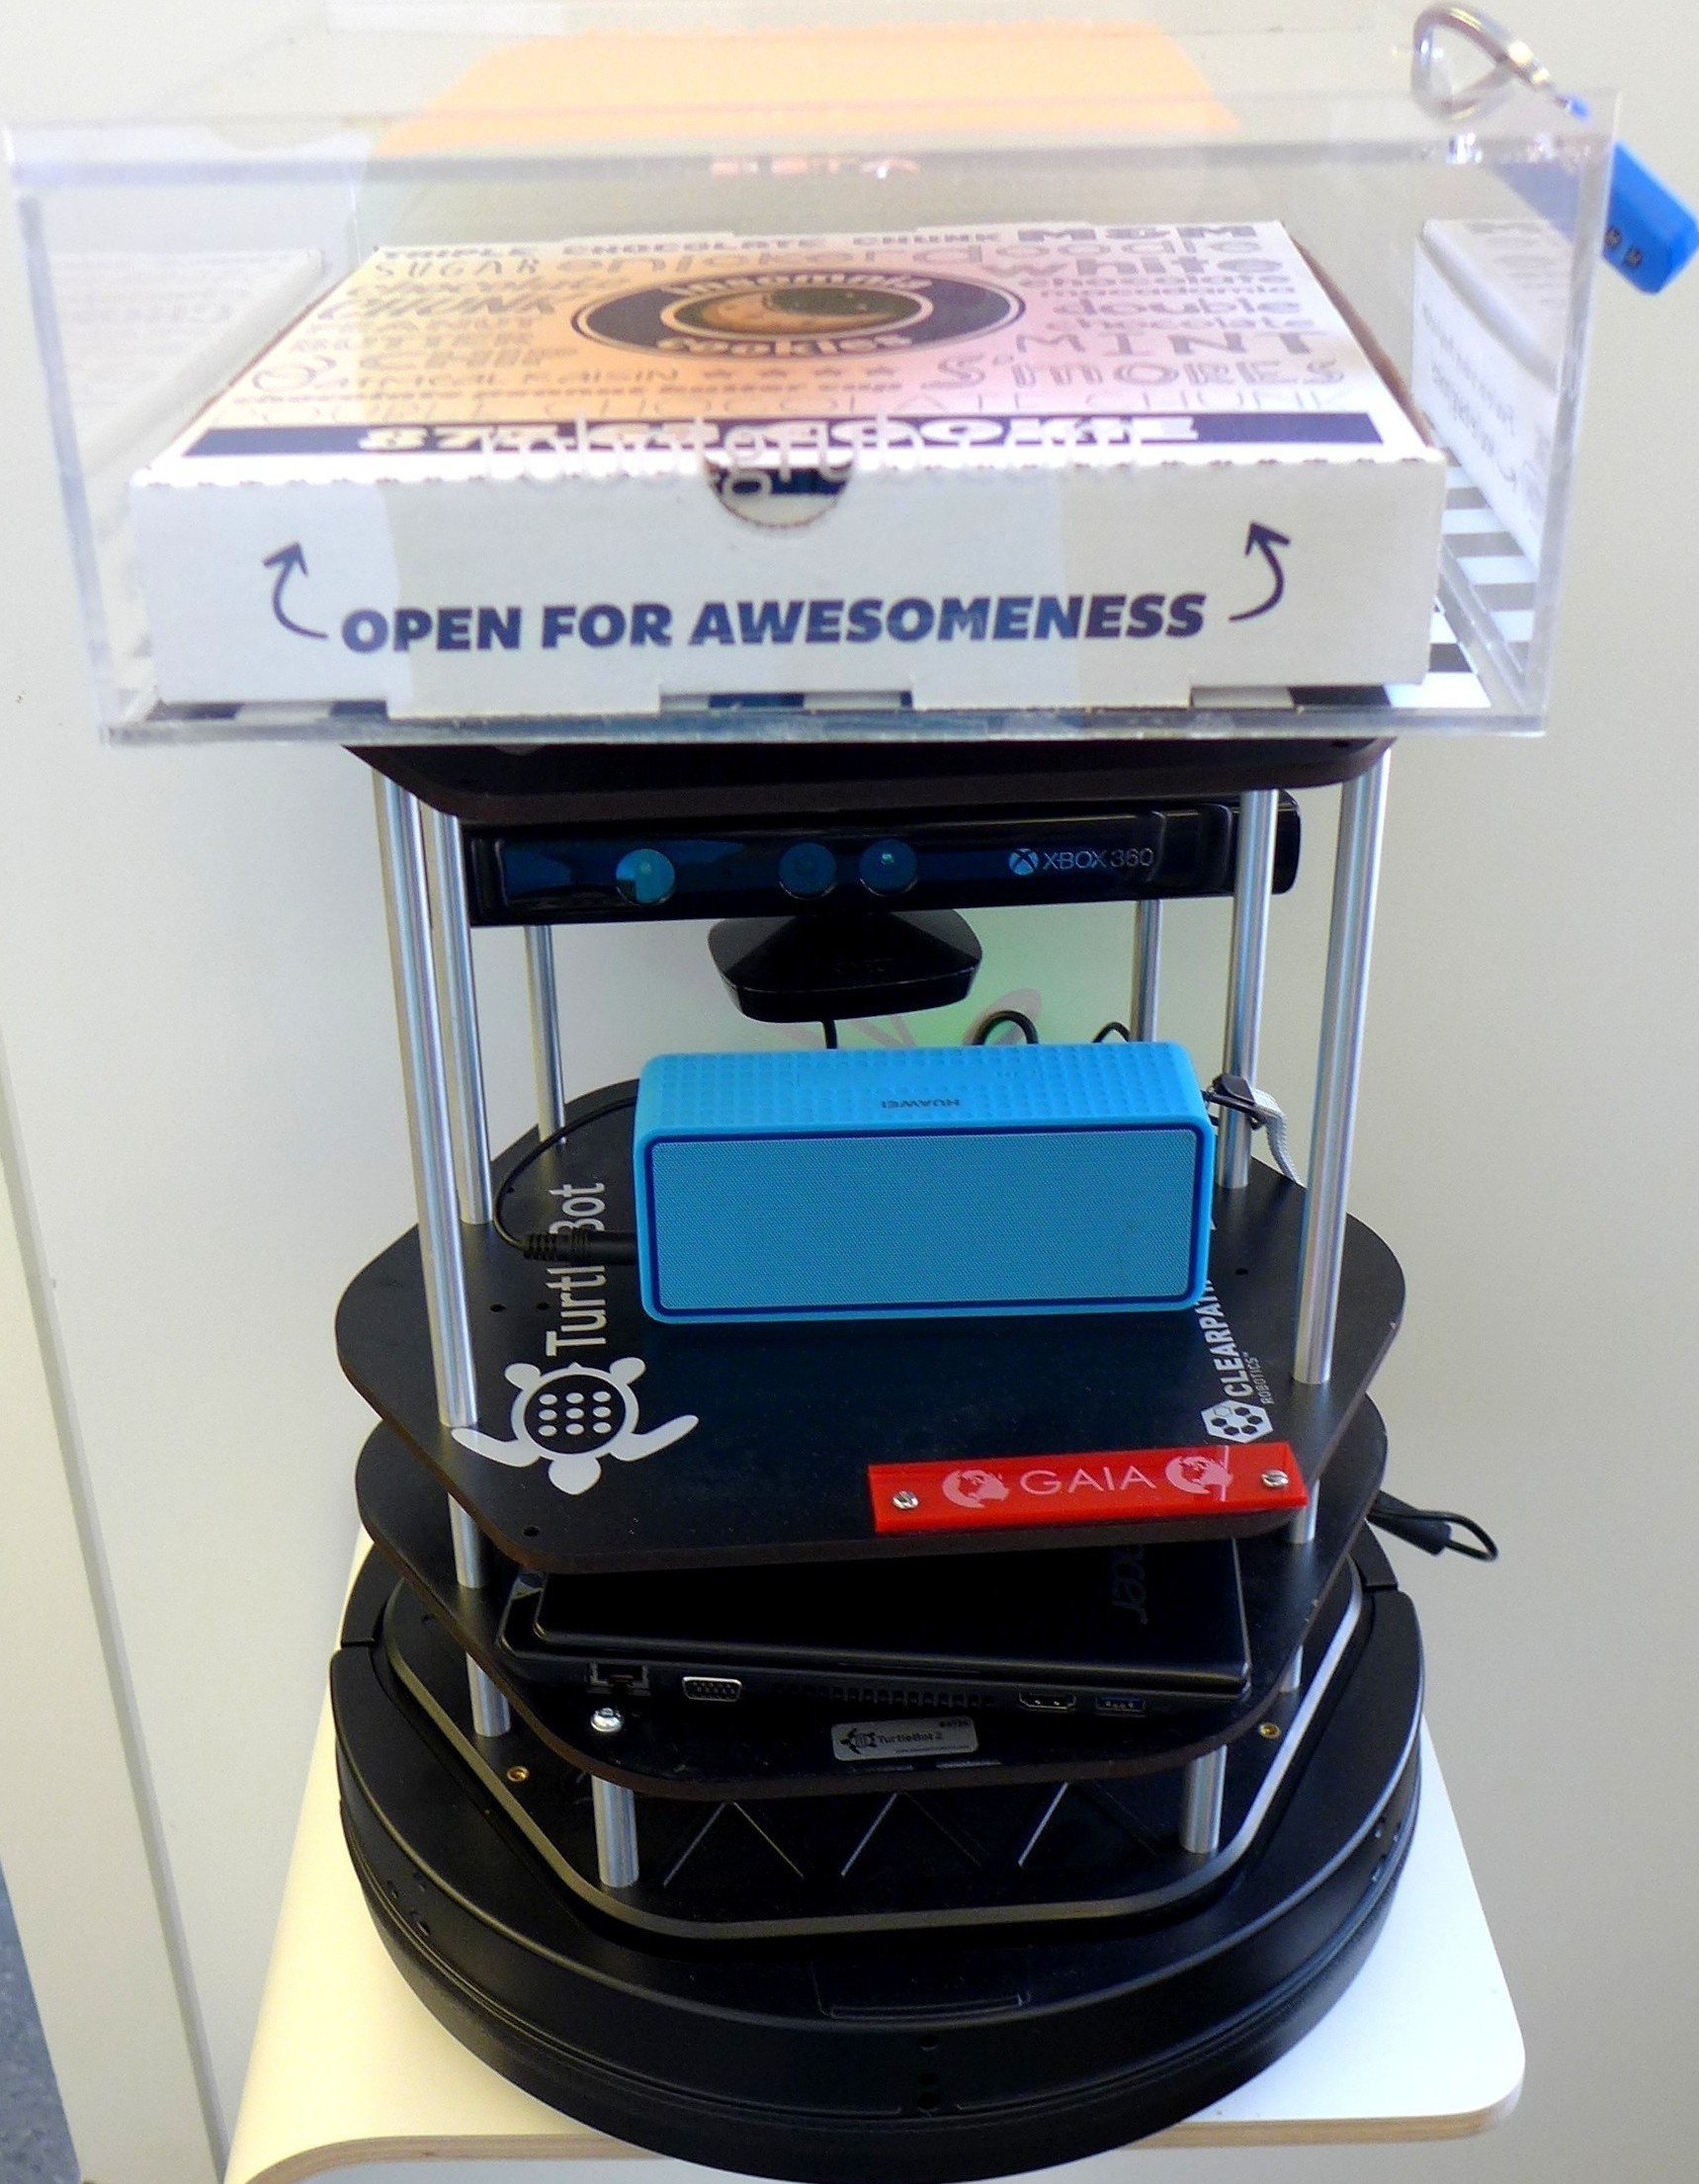 A small TurtleBot robot, kitted out with a cookie delivery box.